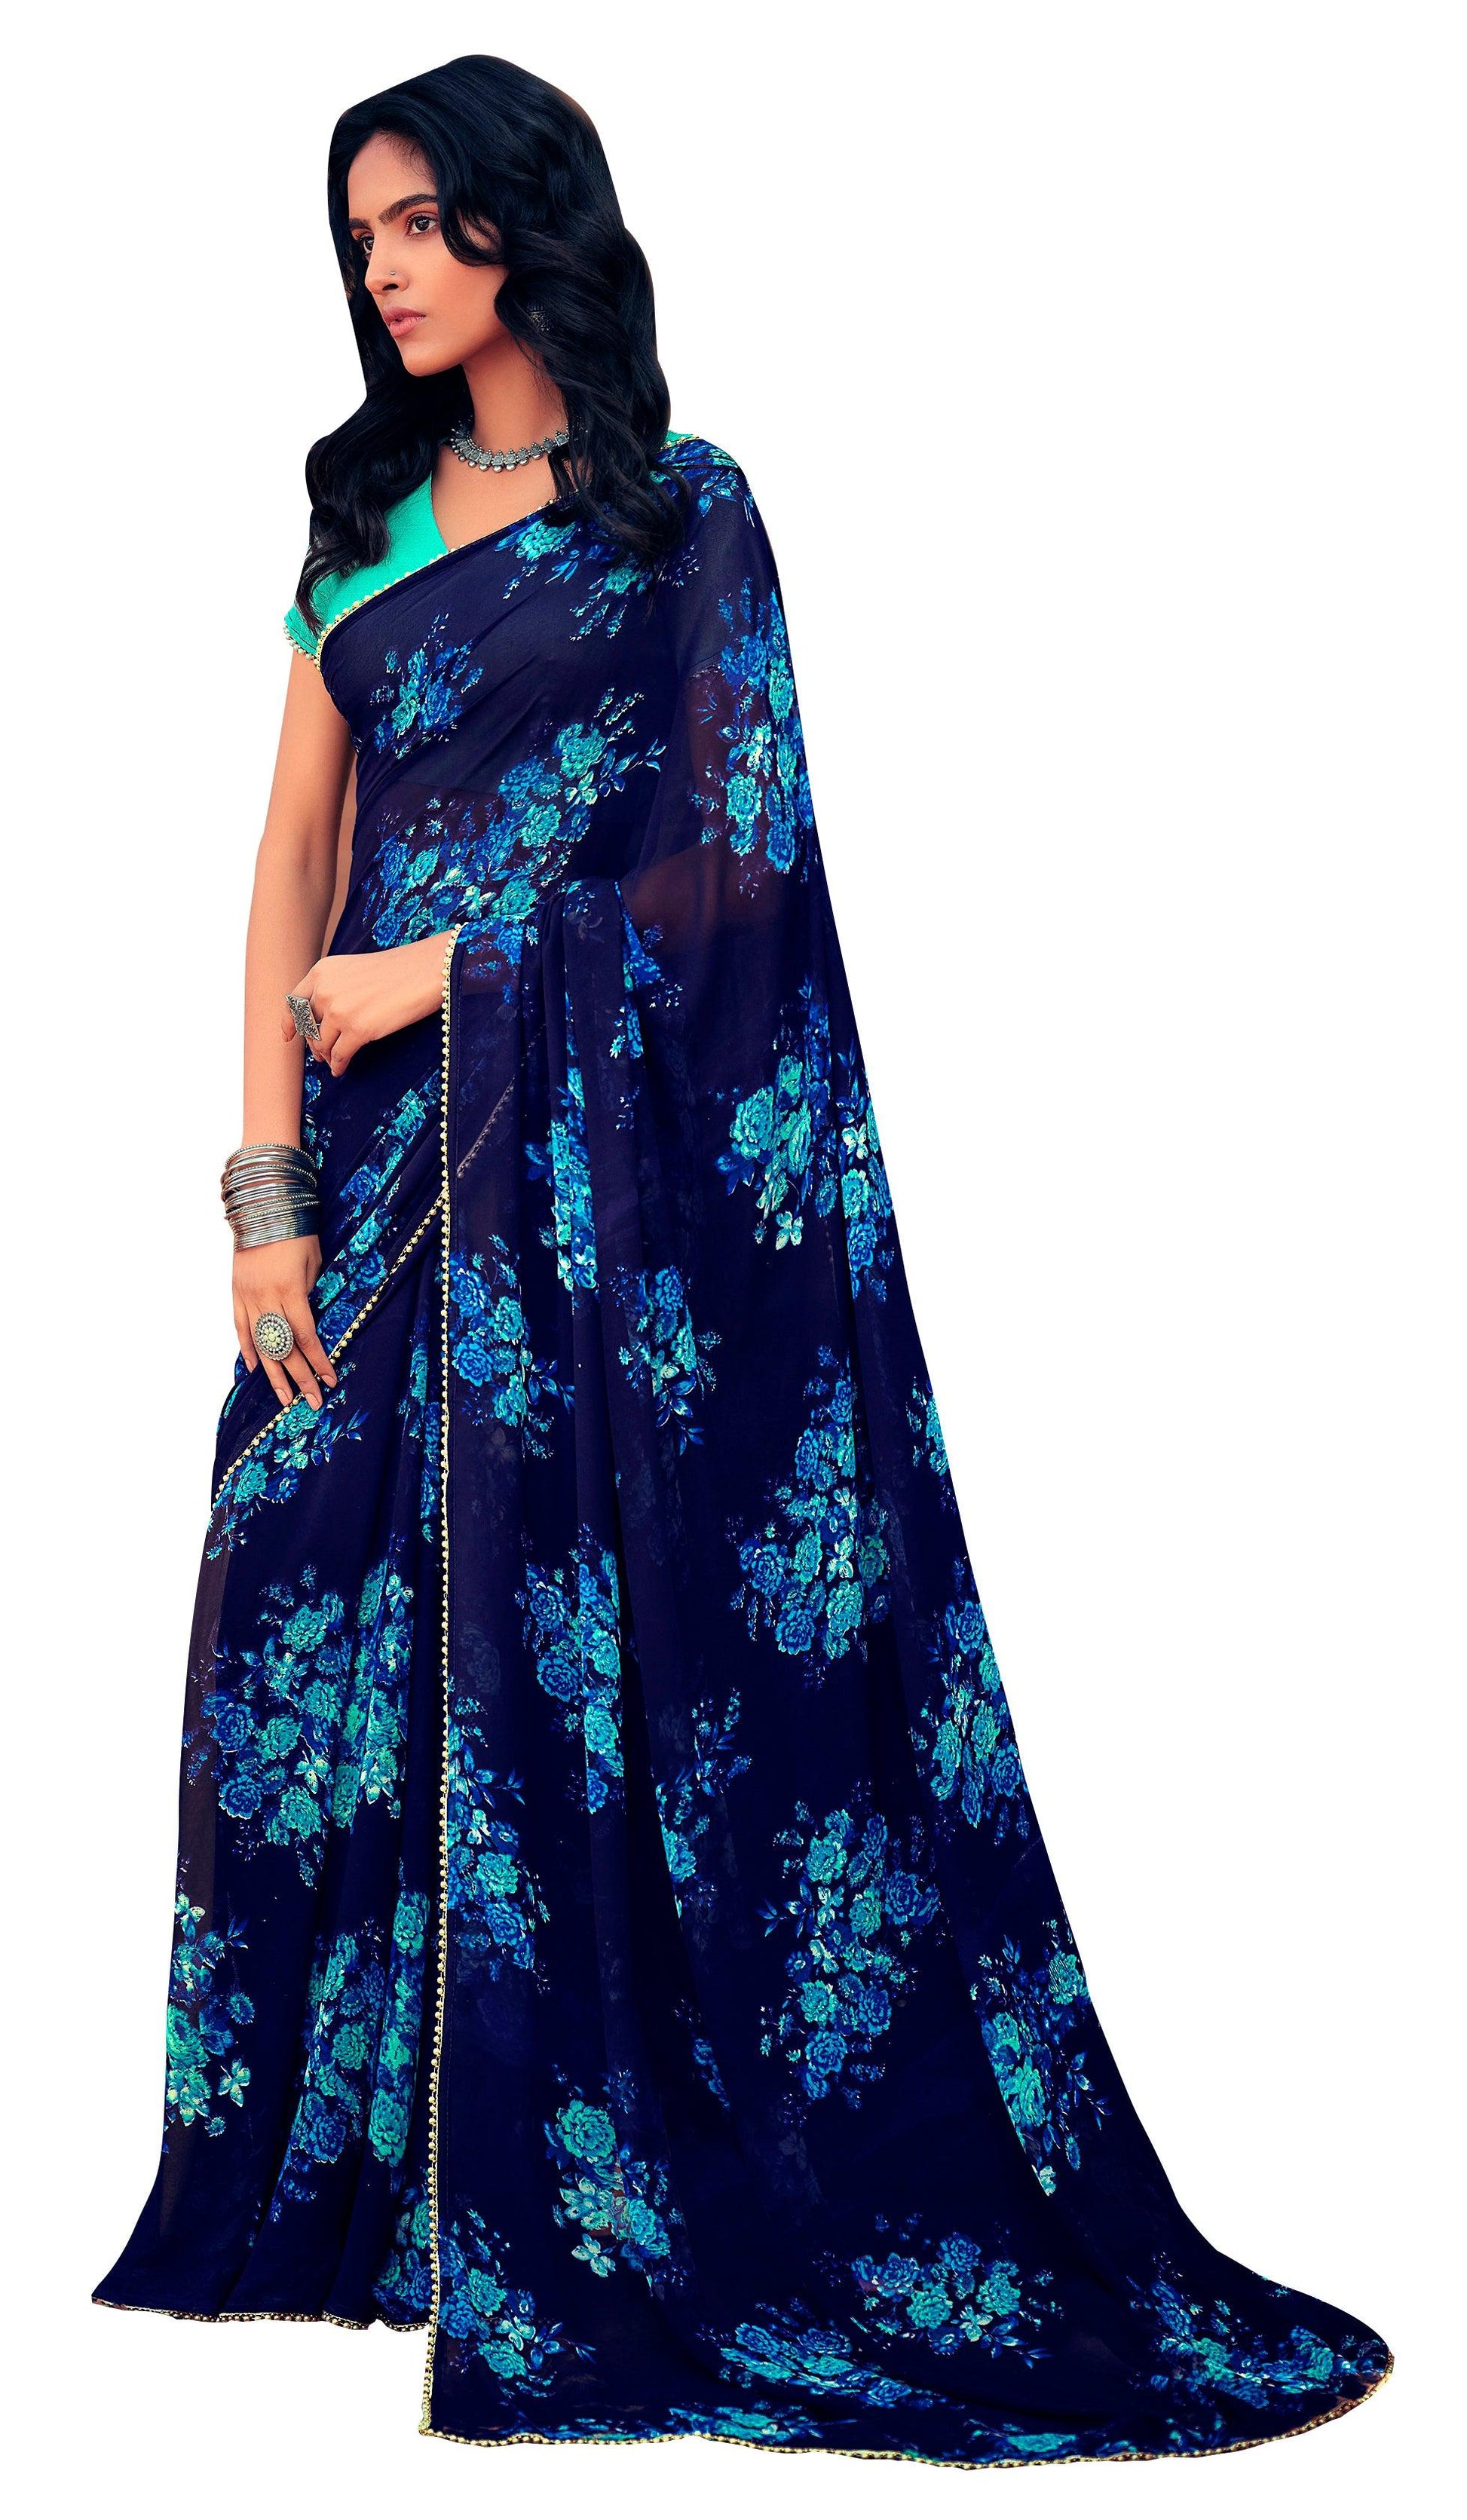 Blue Floral Printed Saree with Pearl Lace Work MN3810 - Ethnic's By Anvi Creations